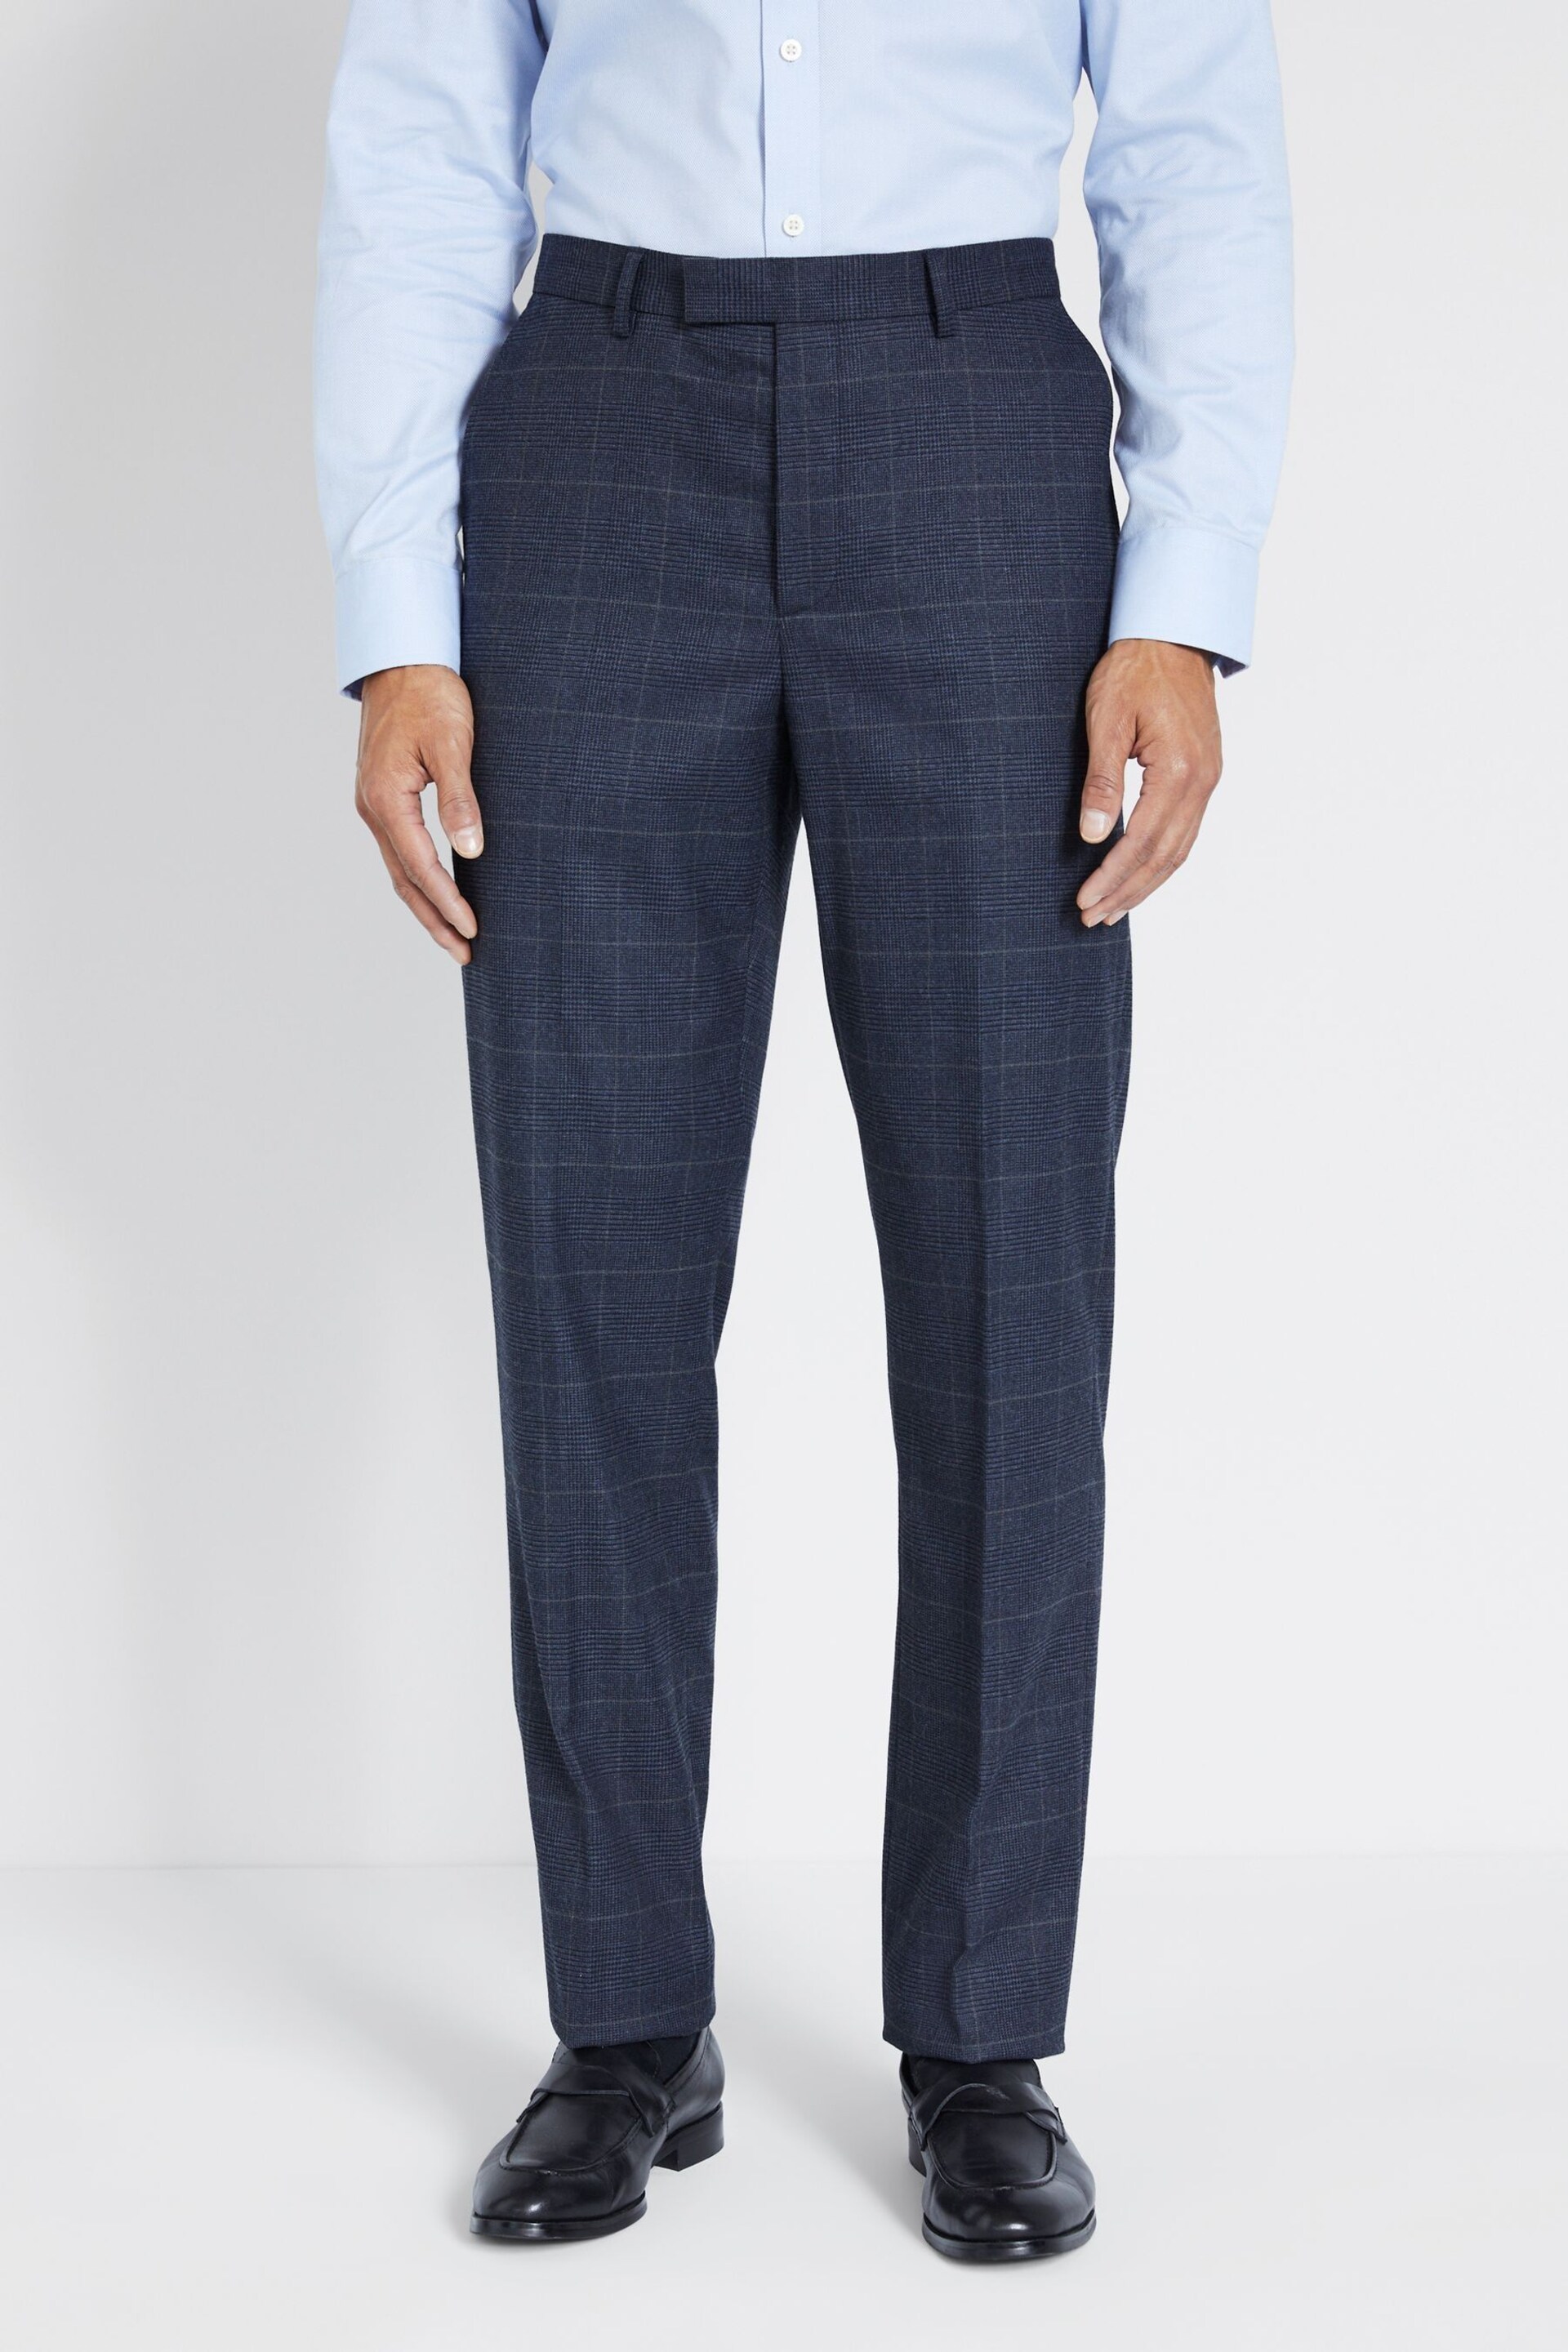 MOSS Regular Fit Blue With Khaki Check Suit: Trousers - Image 1 of 2